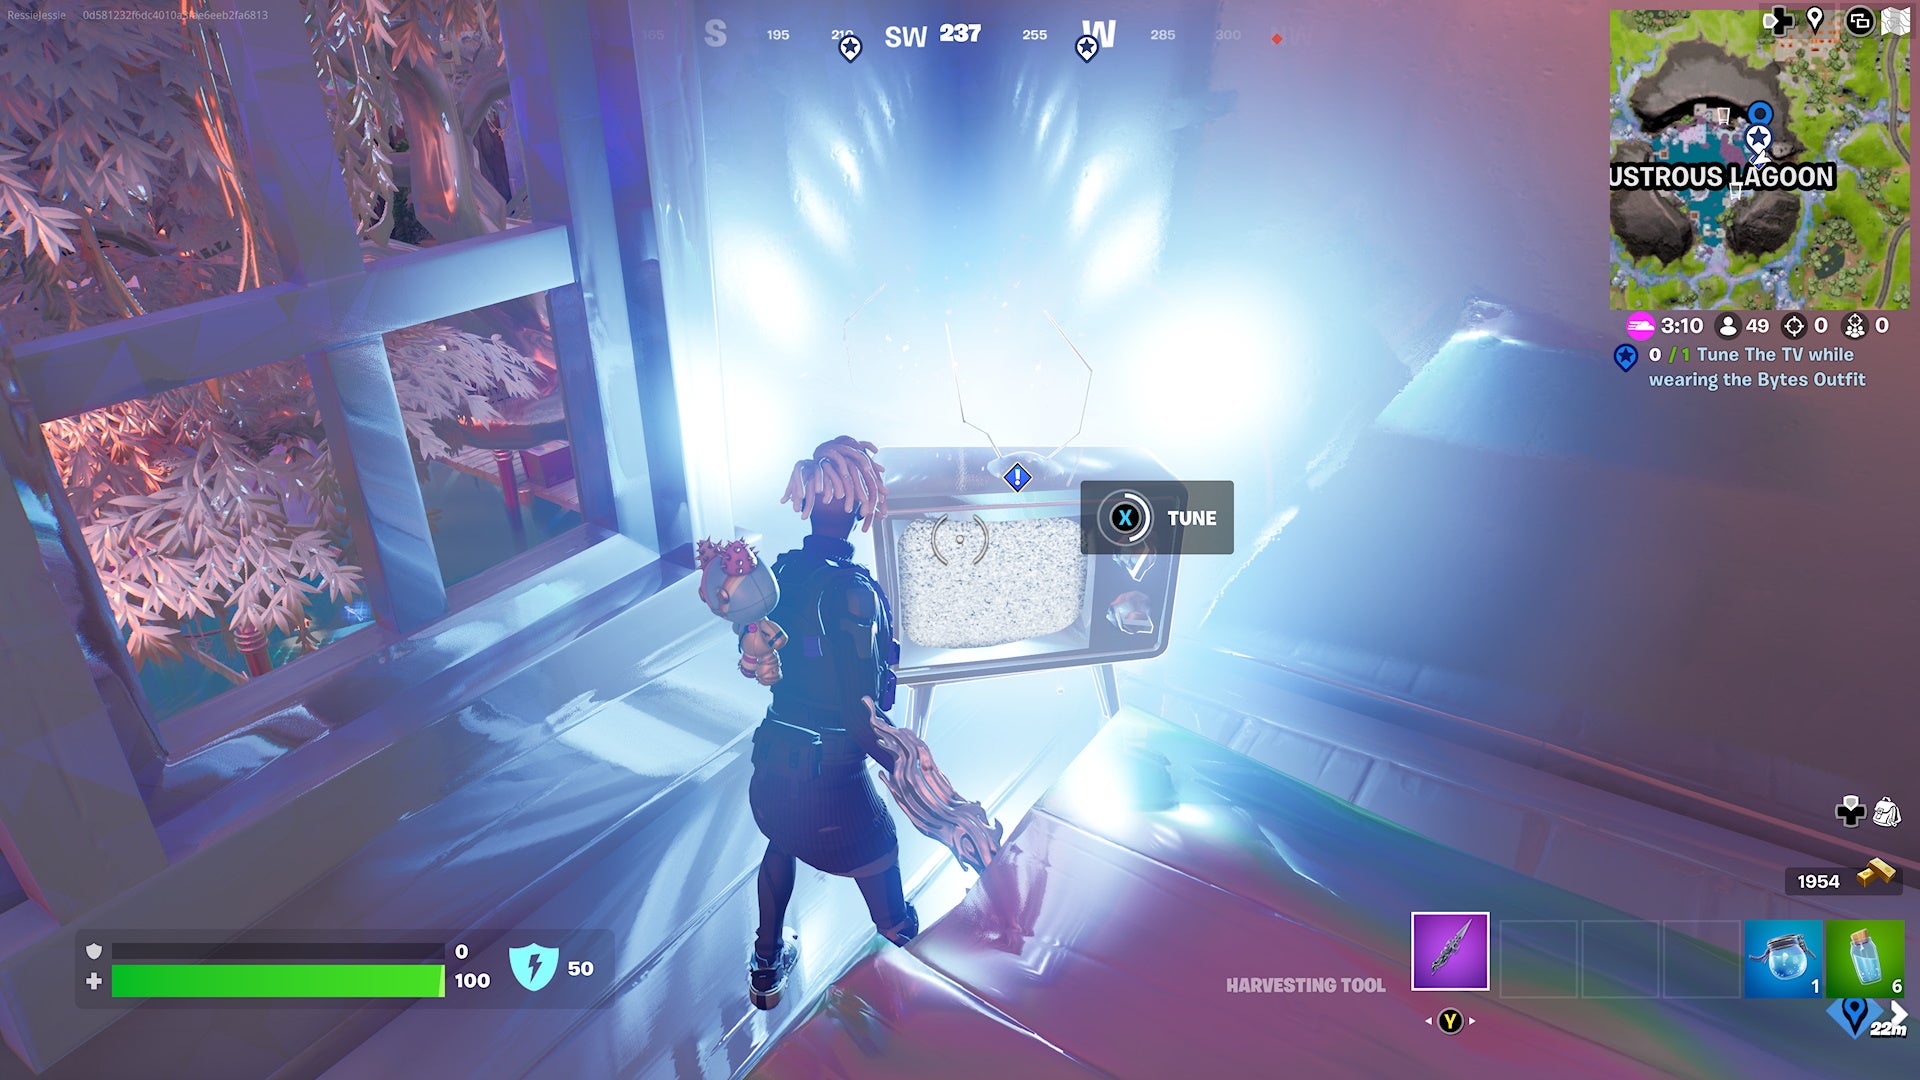 How to tune the TV in Fortnite while wearing the Bytes outfit 3